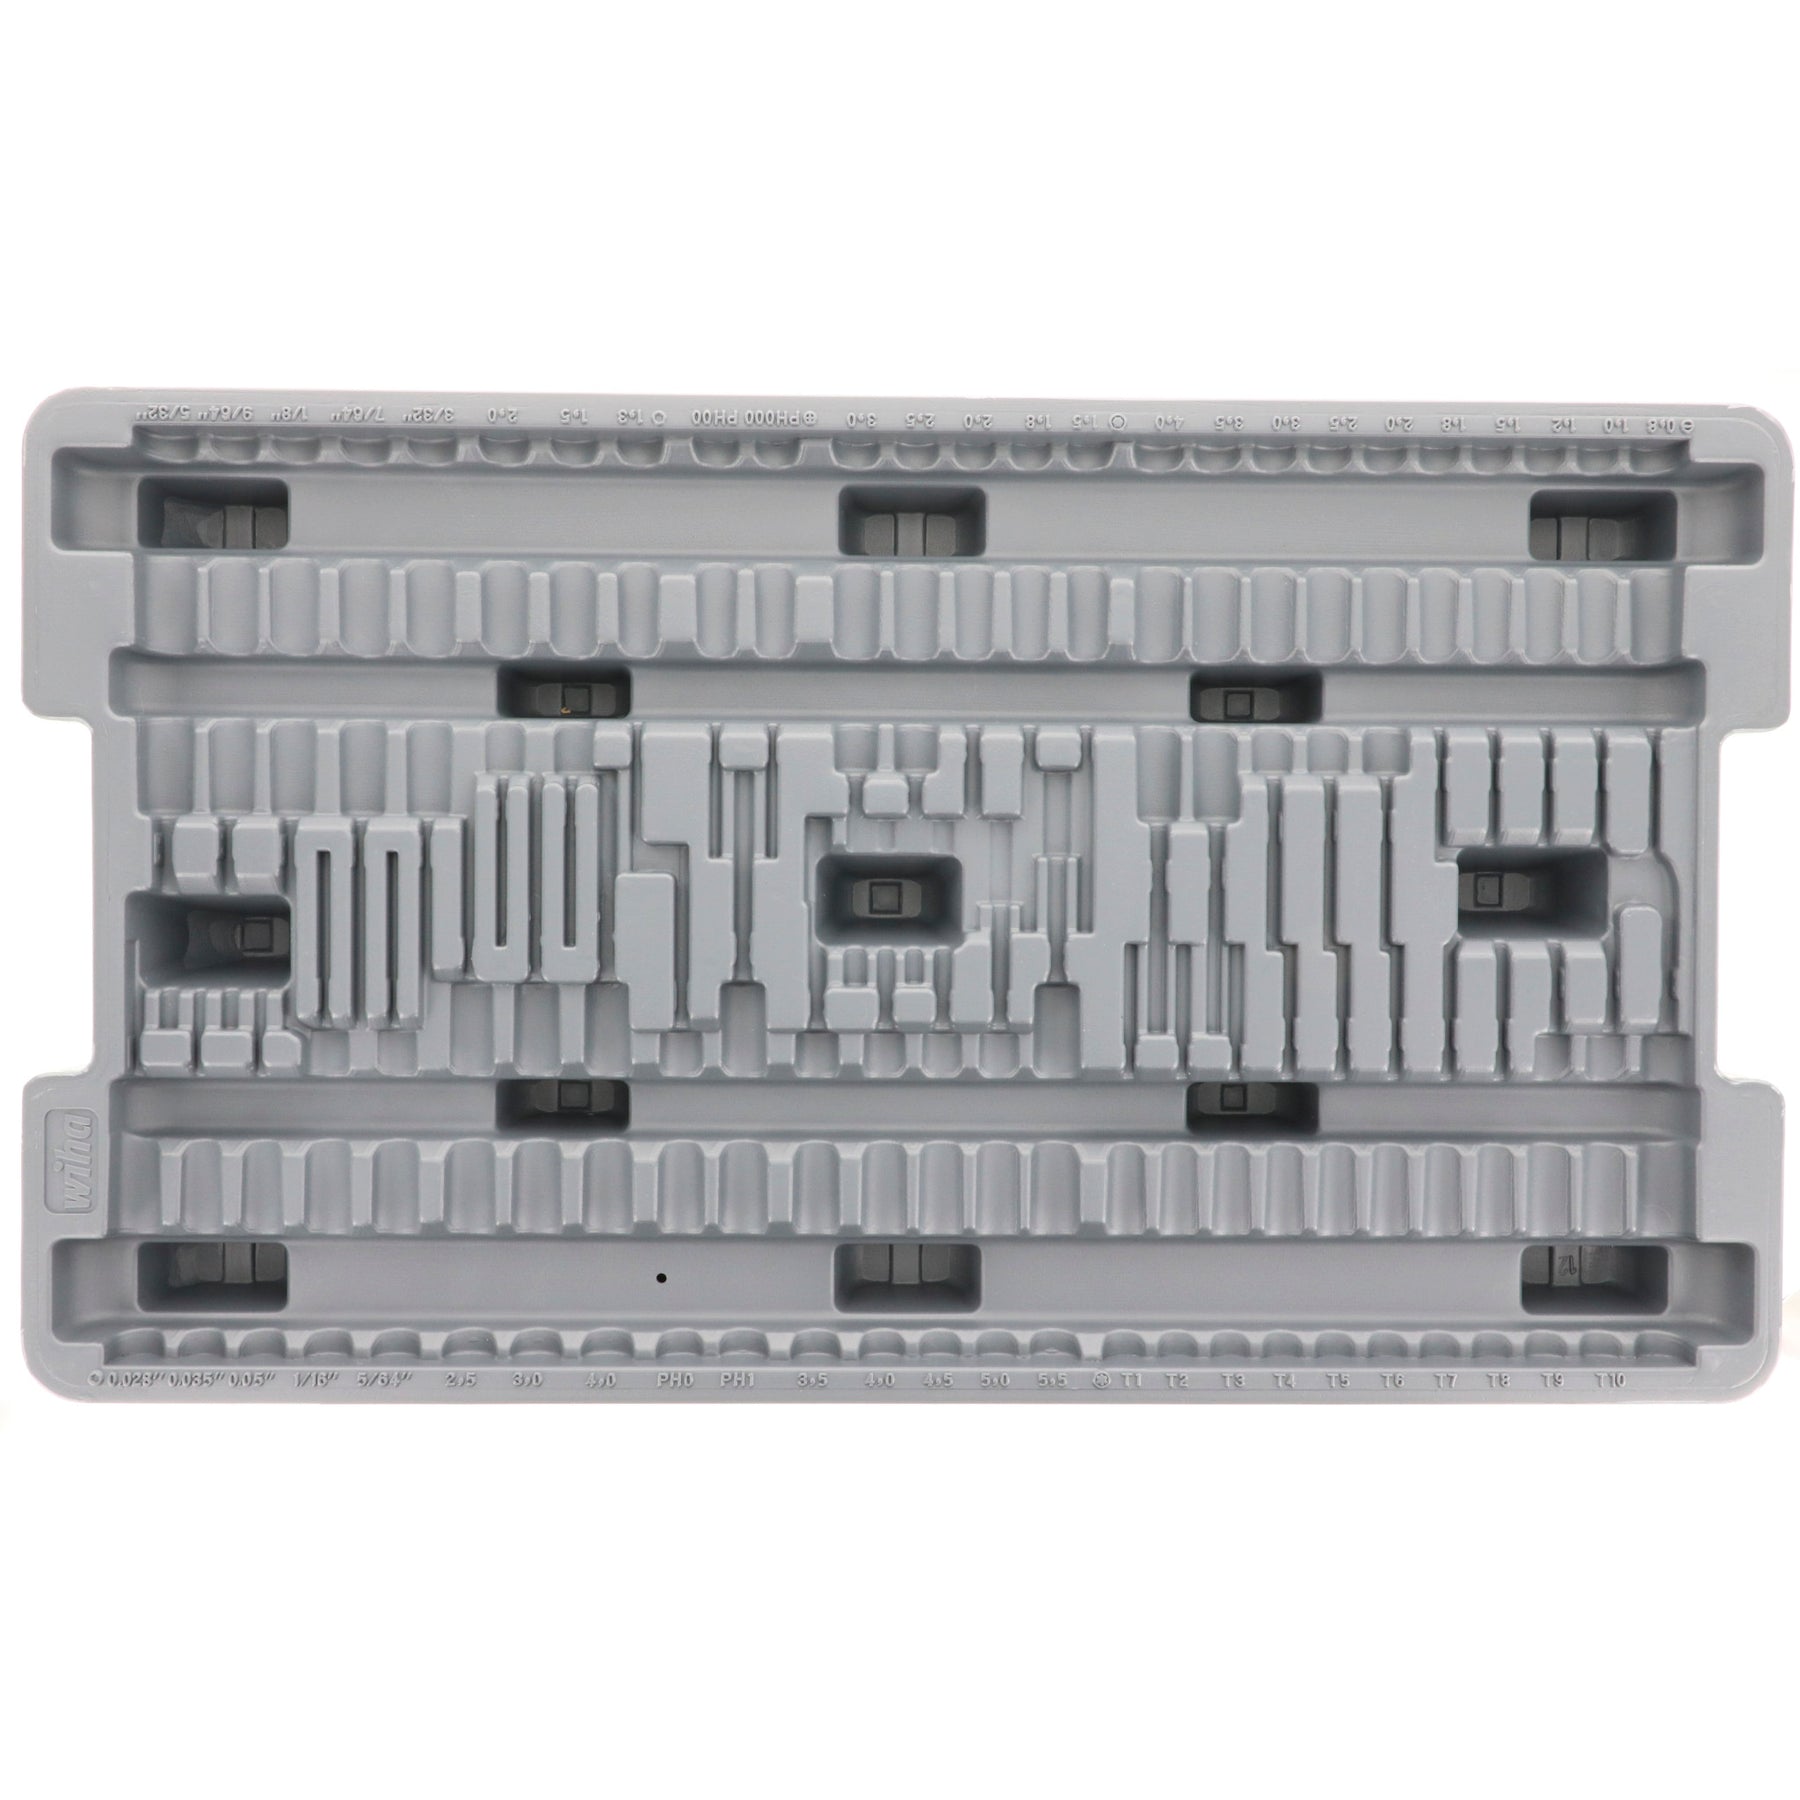 MOLDED TRAY FOR 51 PRECISION